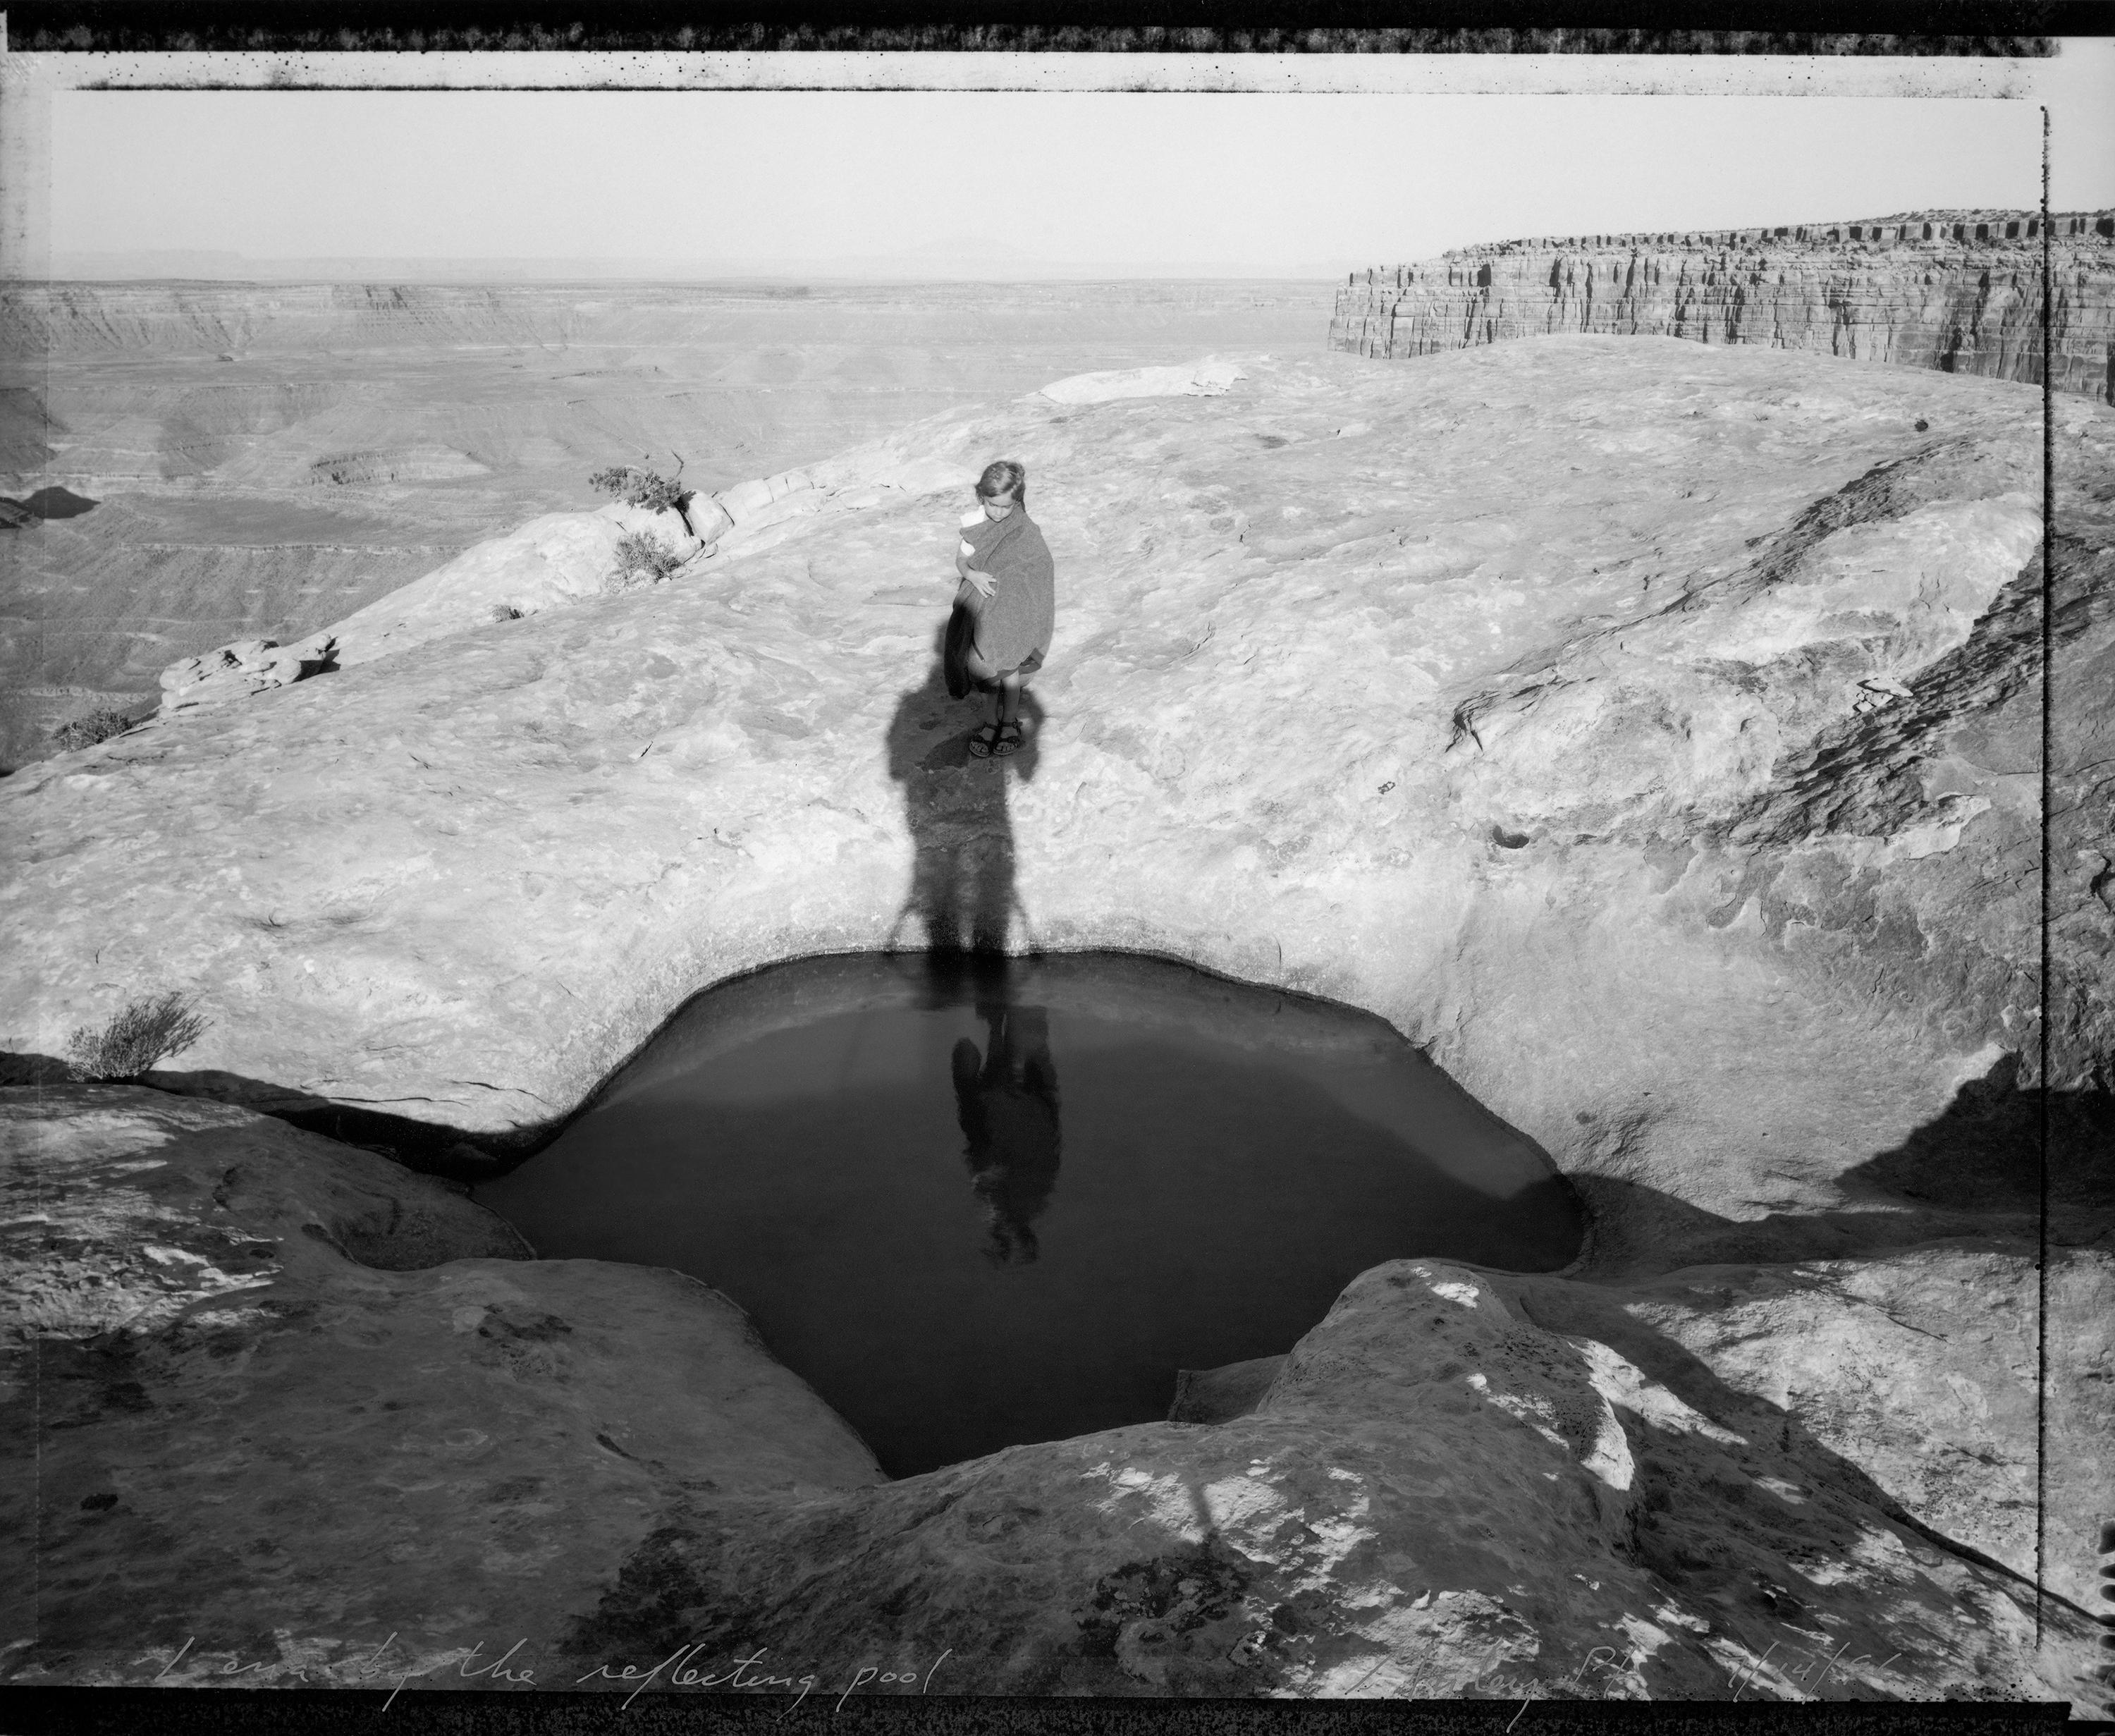 Mark Klett Black and White Photograph - Lena by reflecting pool, Muley Pt., 7/14/96 